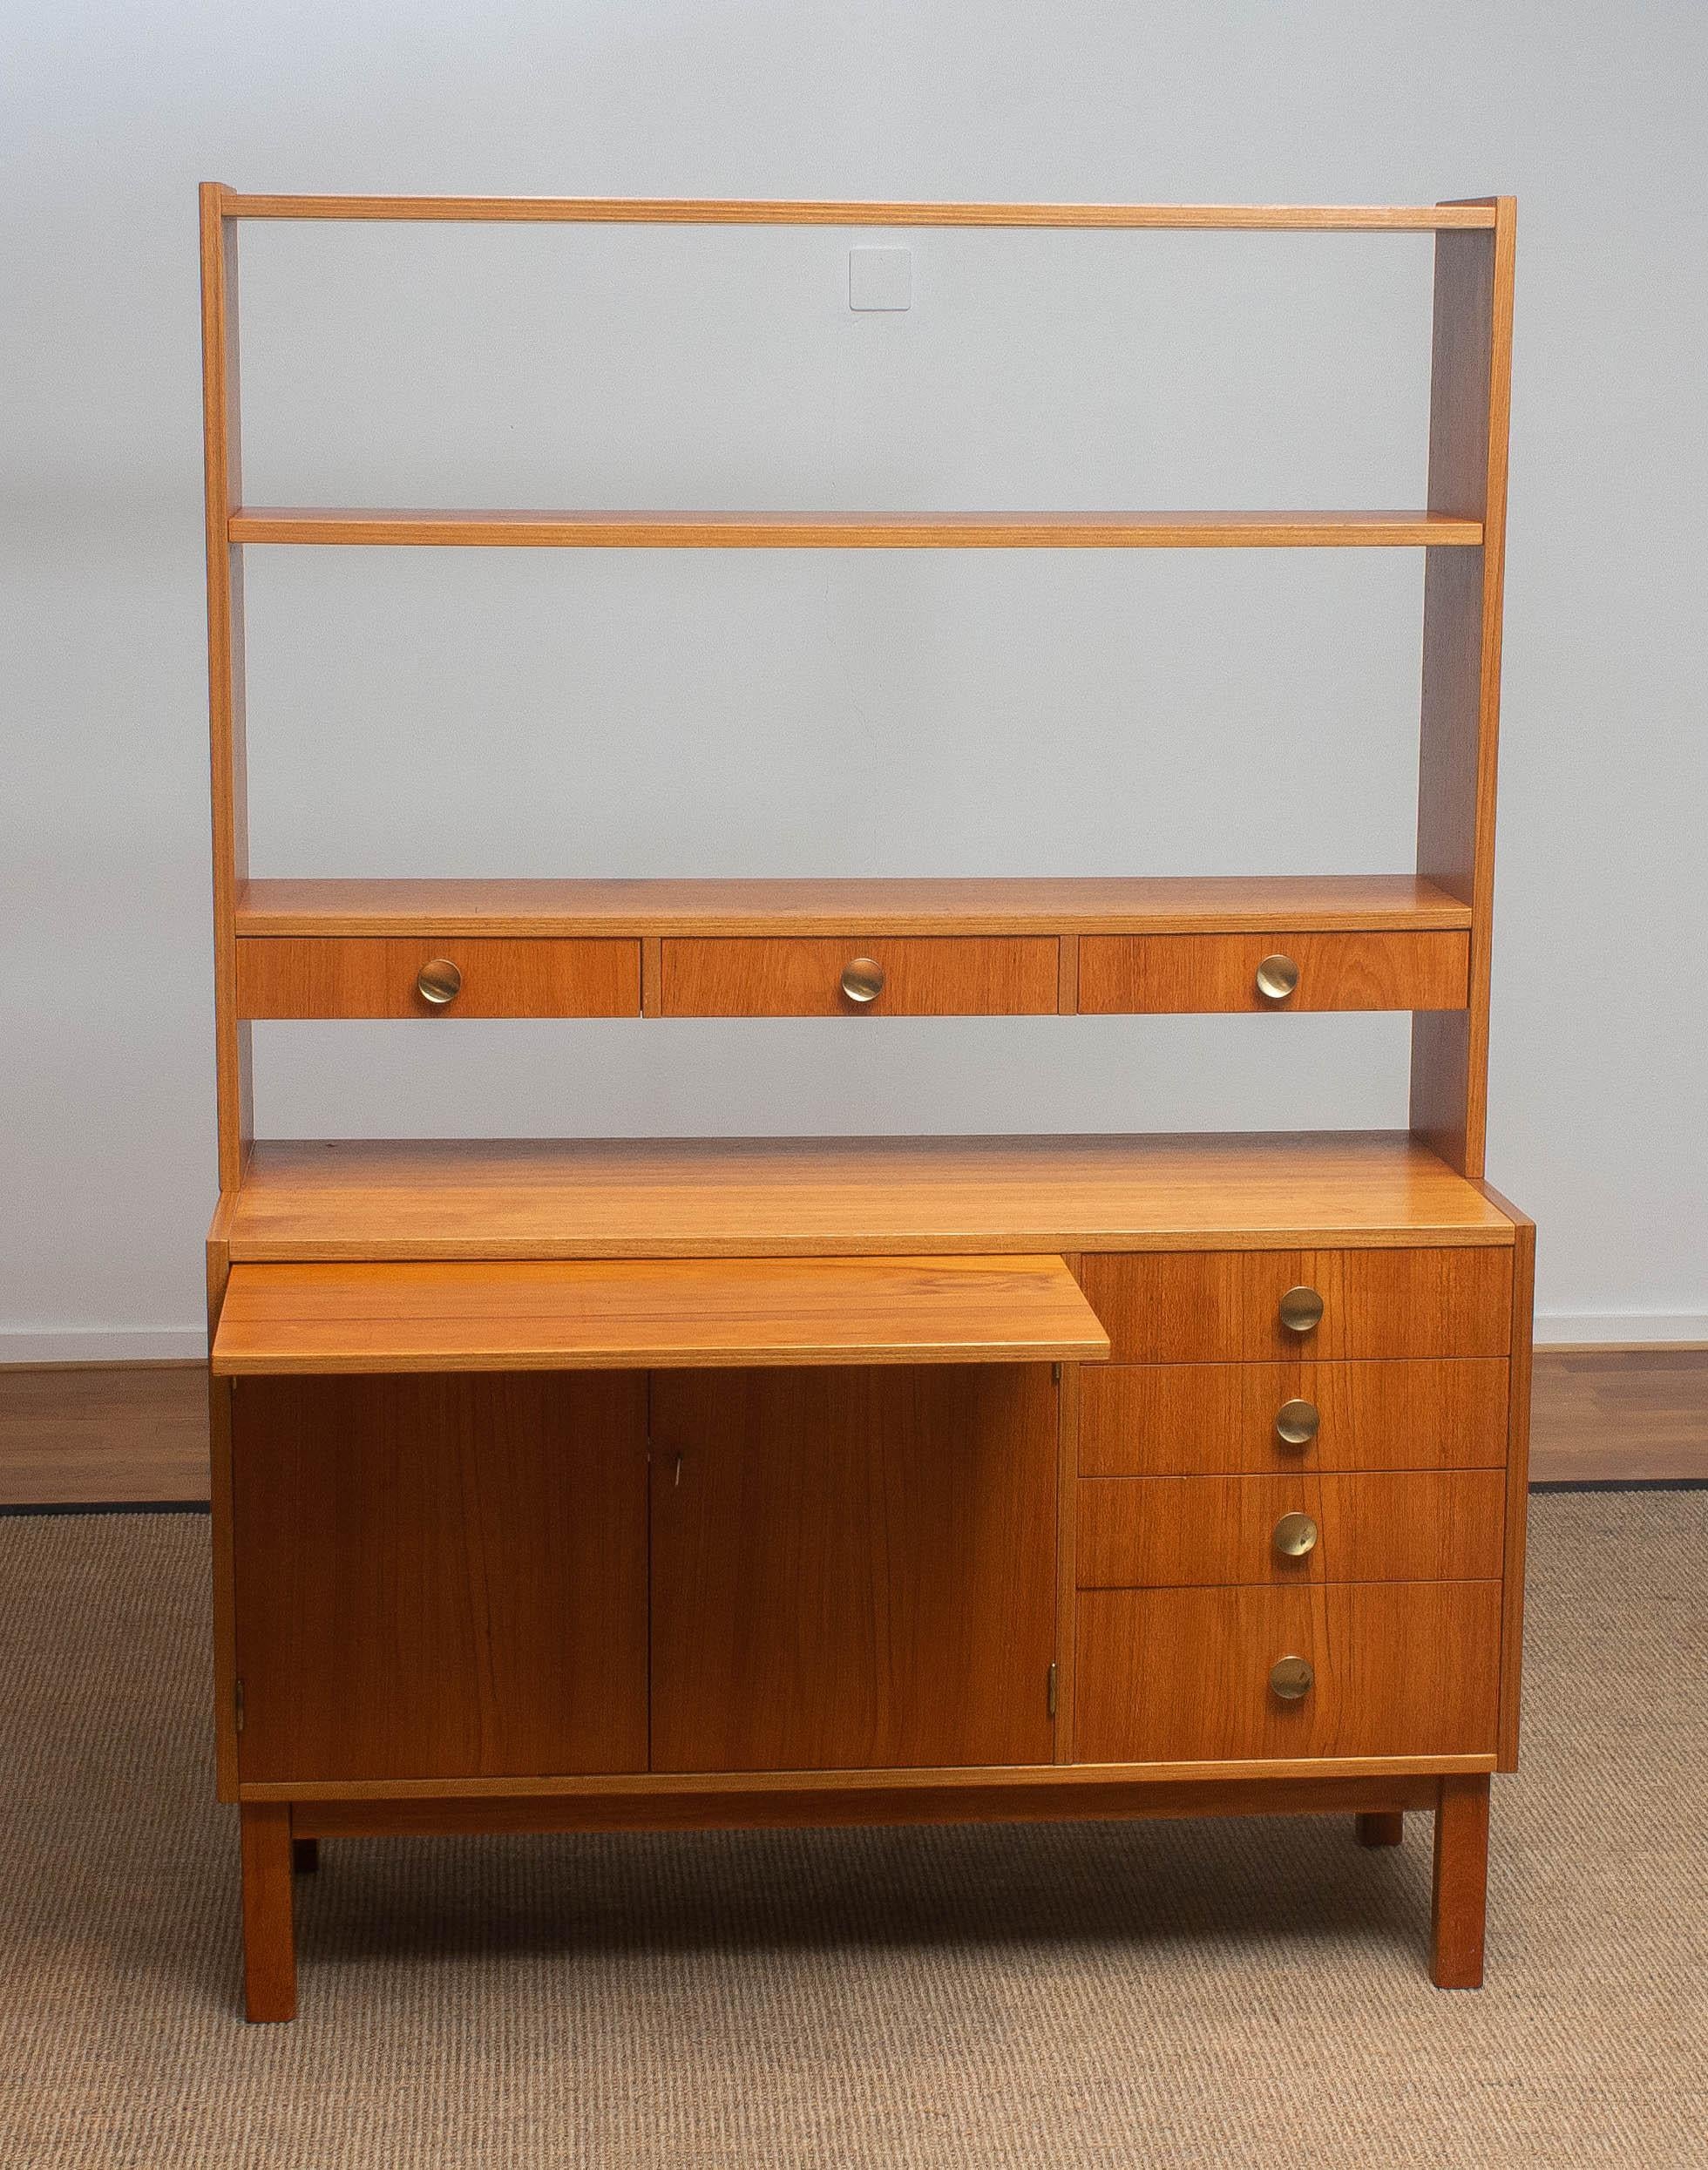 1950s Teak Veneer and Brass Bookshelves Cabinet with Writing Space from Sweden 4